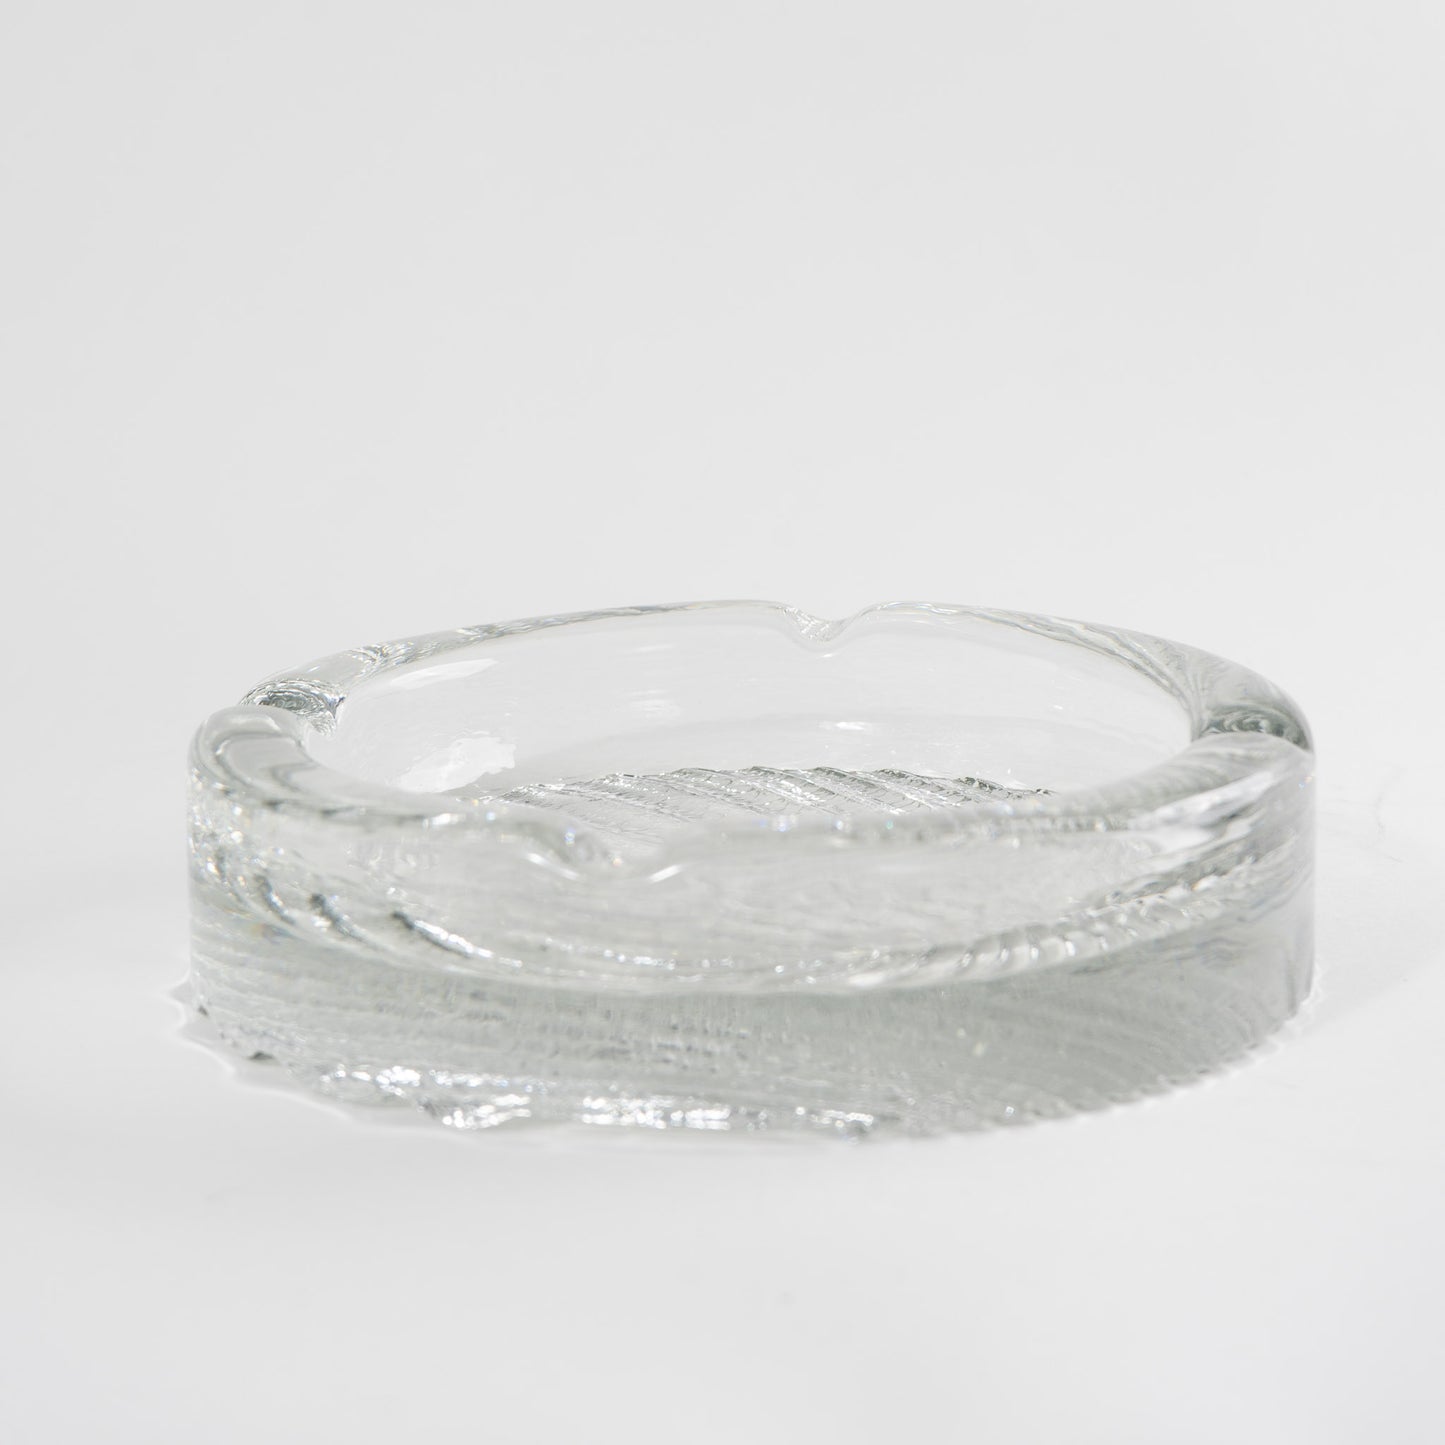 Vintage Shell Glass Ashtray Catchall - Thick glass